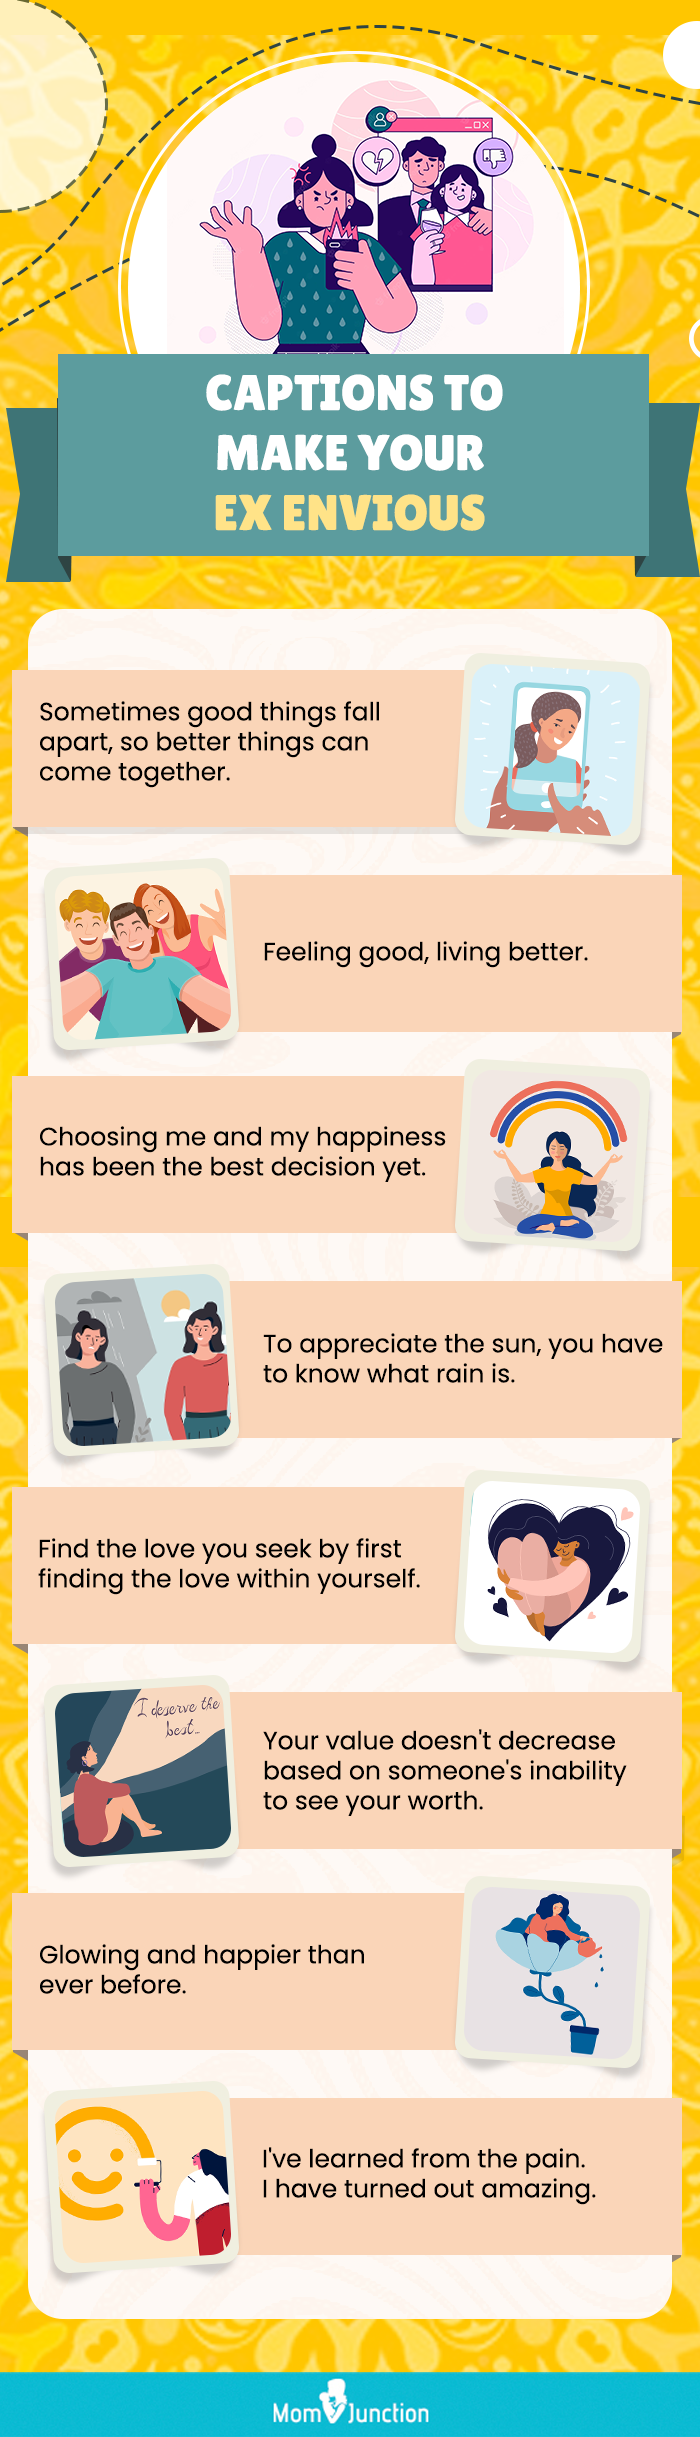 captions to make your ex envious [infographic]